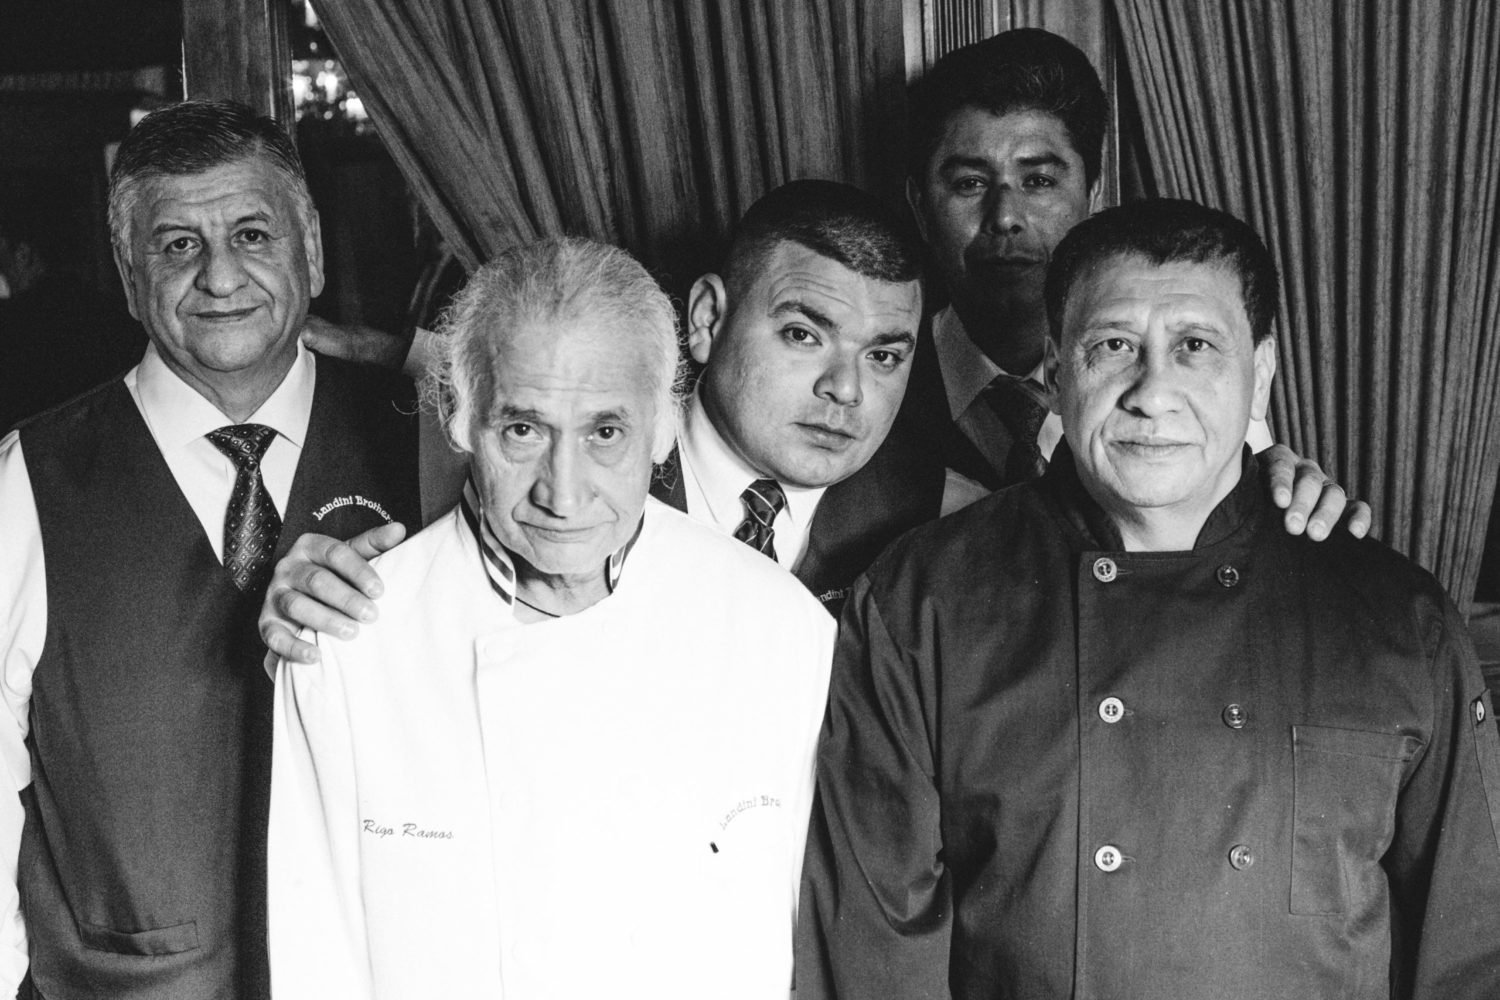 Chef Rigoberto Ramos, pictured with Landini Brothers staff, is celebrating 40 years with the 40 year old restaurant. Photo by Maya Oren/MOJALVO.